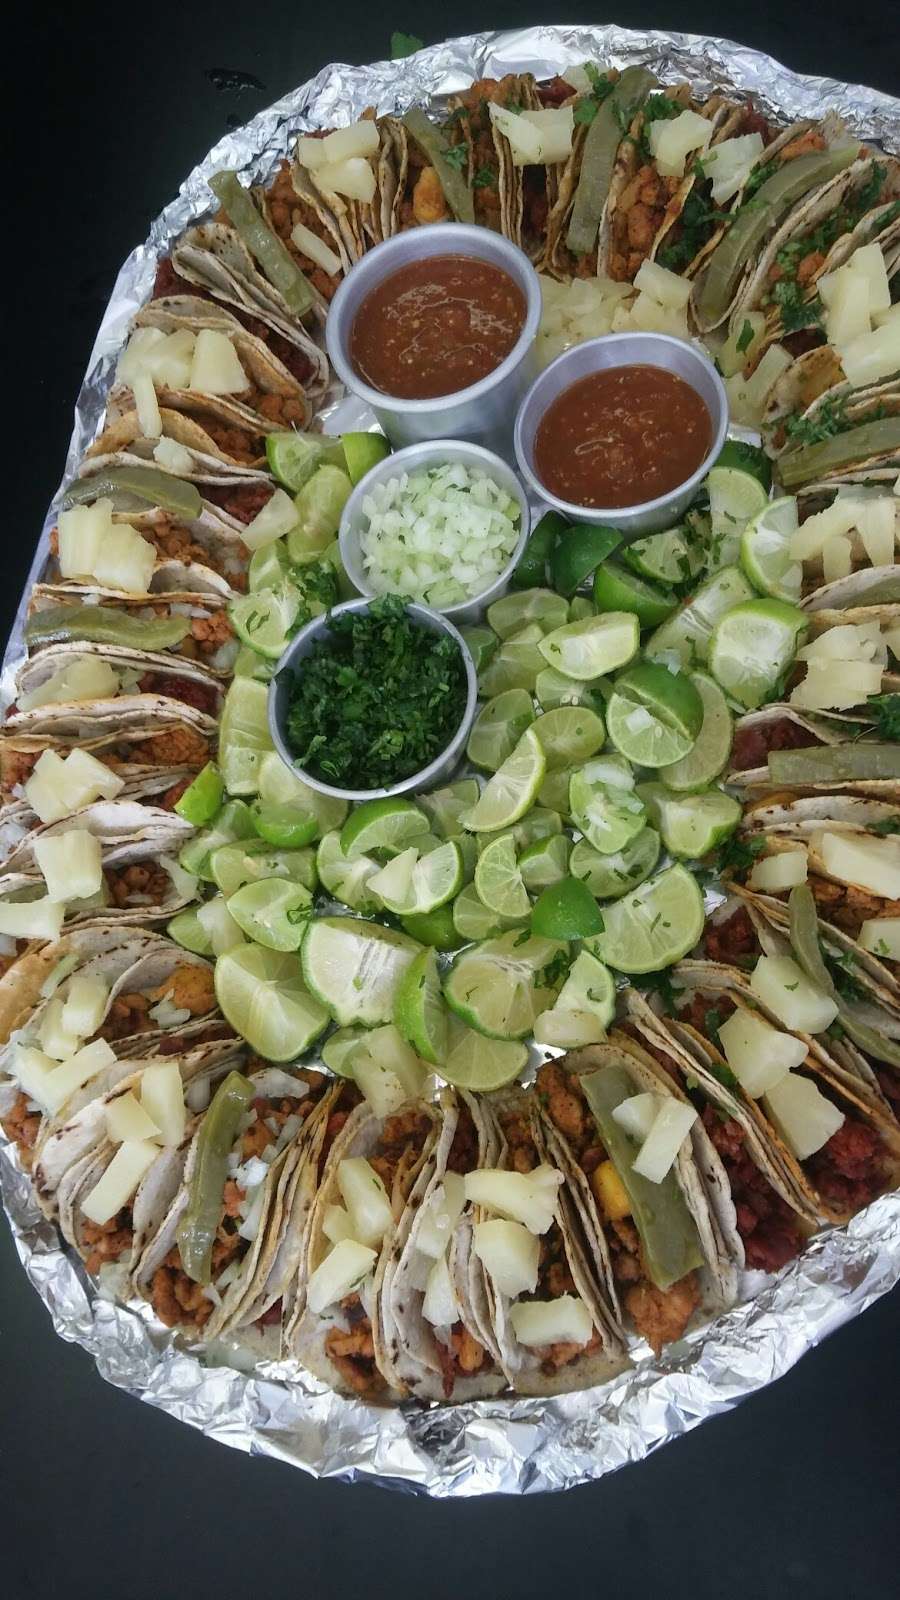 La Cabanita authentic Mexican food and catering | 2720 S Pike Ave, Allentown, PA 18103 | Phone: (484) 274-6277